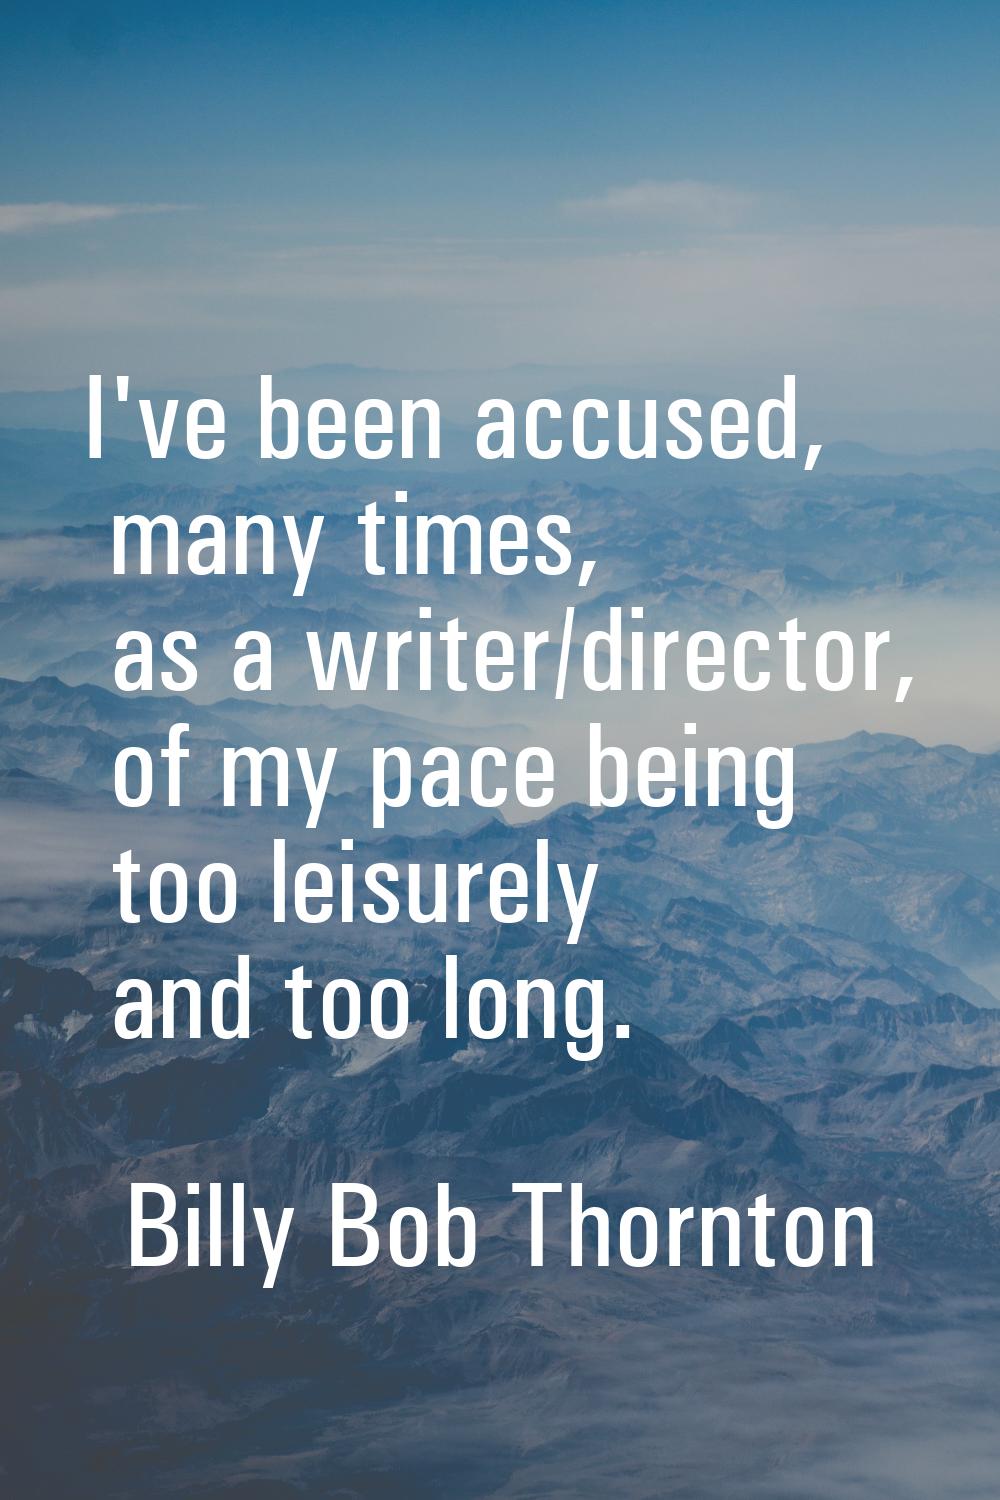 I've been accused, many times, as a writer/director, of my pace being too leisurely and too long.